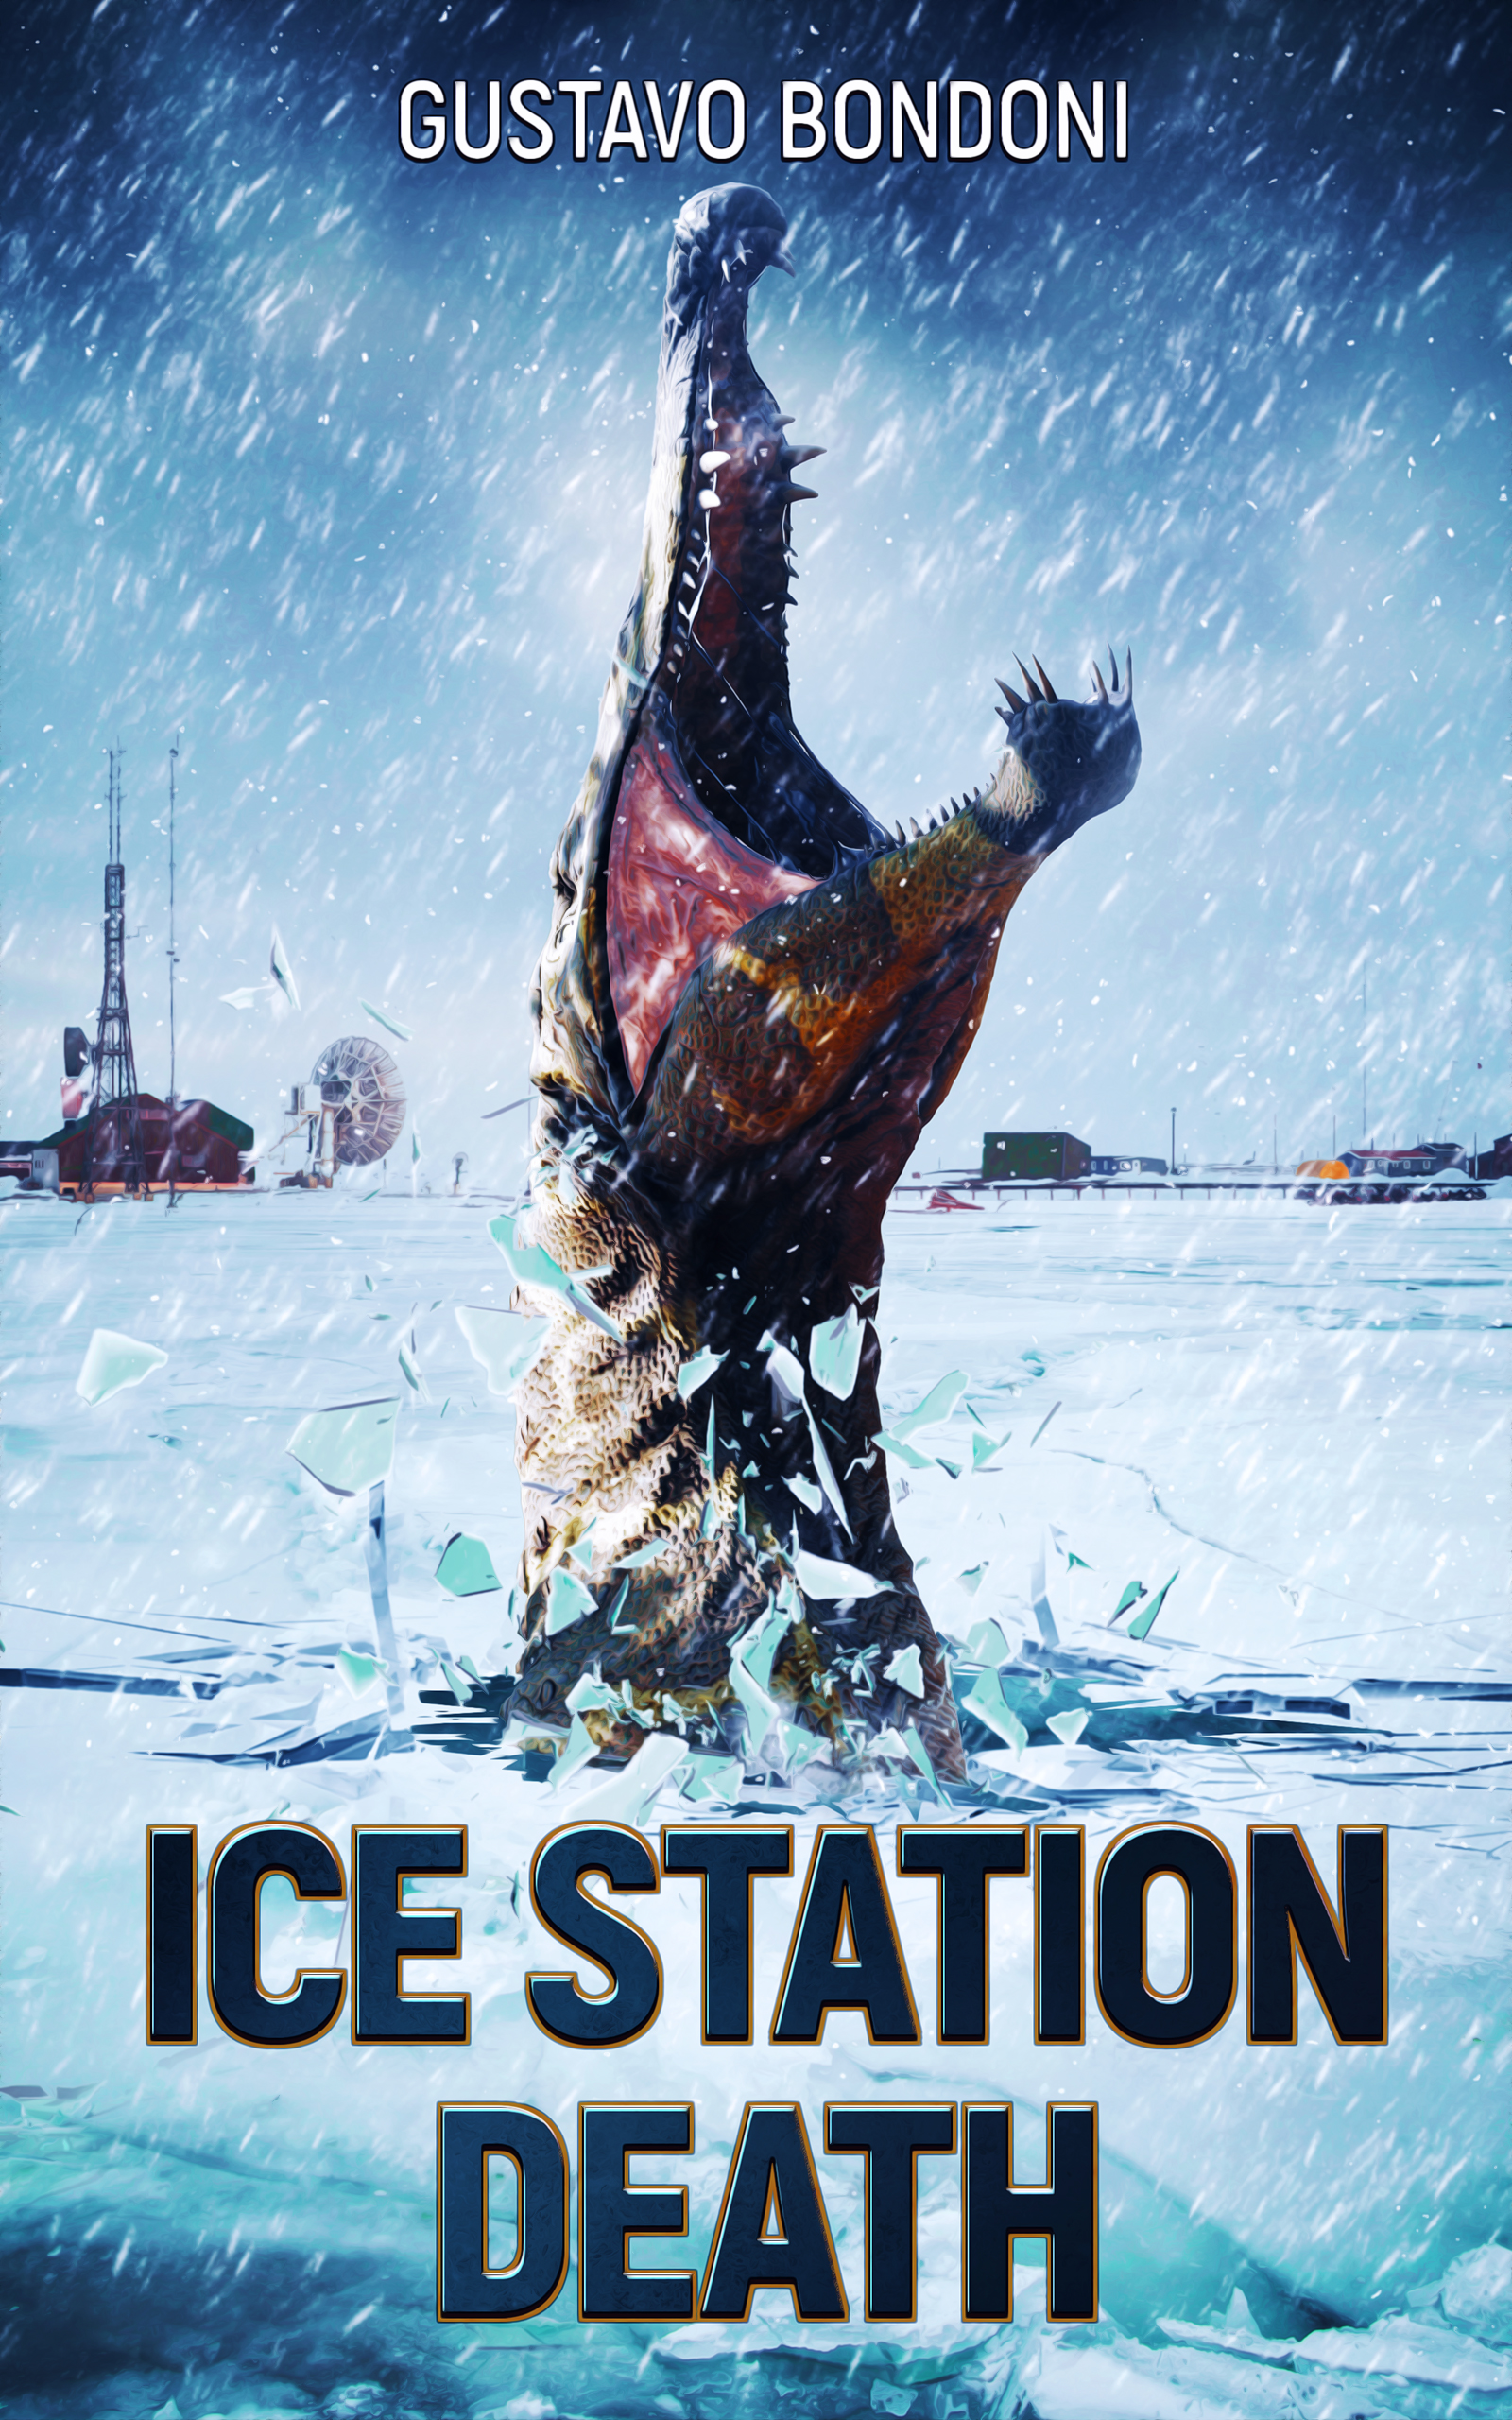 Ice-Station-Death-ebook-cover